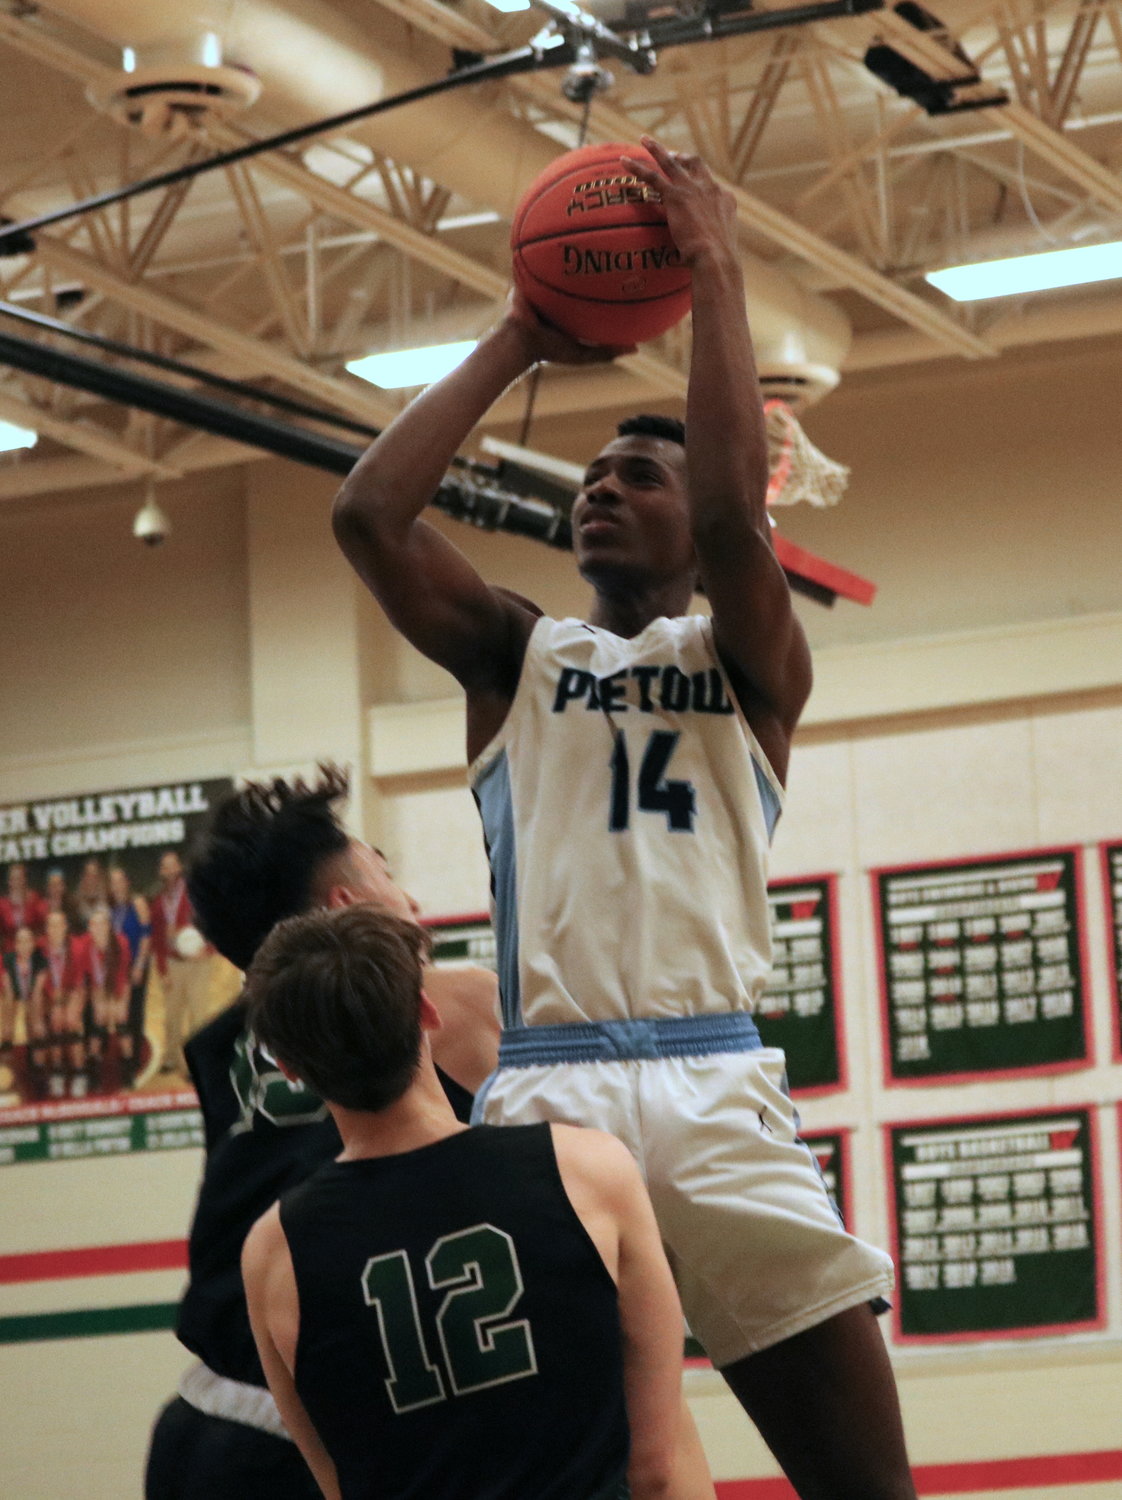 Abou Camara shoots a turnaround jumper during Monday’s game between Paetow and Kingwood Park at The Woodlands High School.